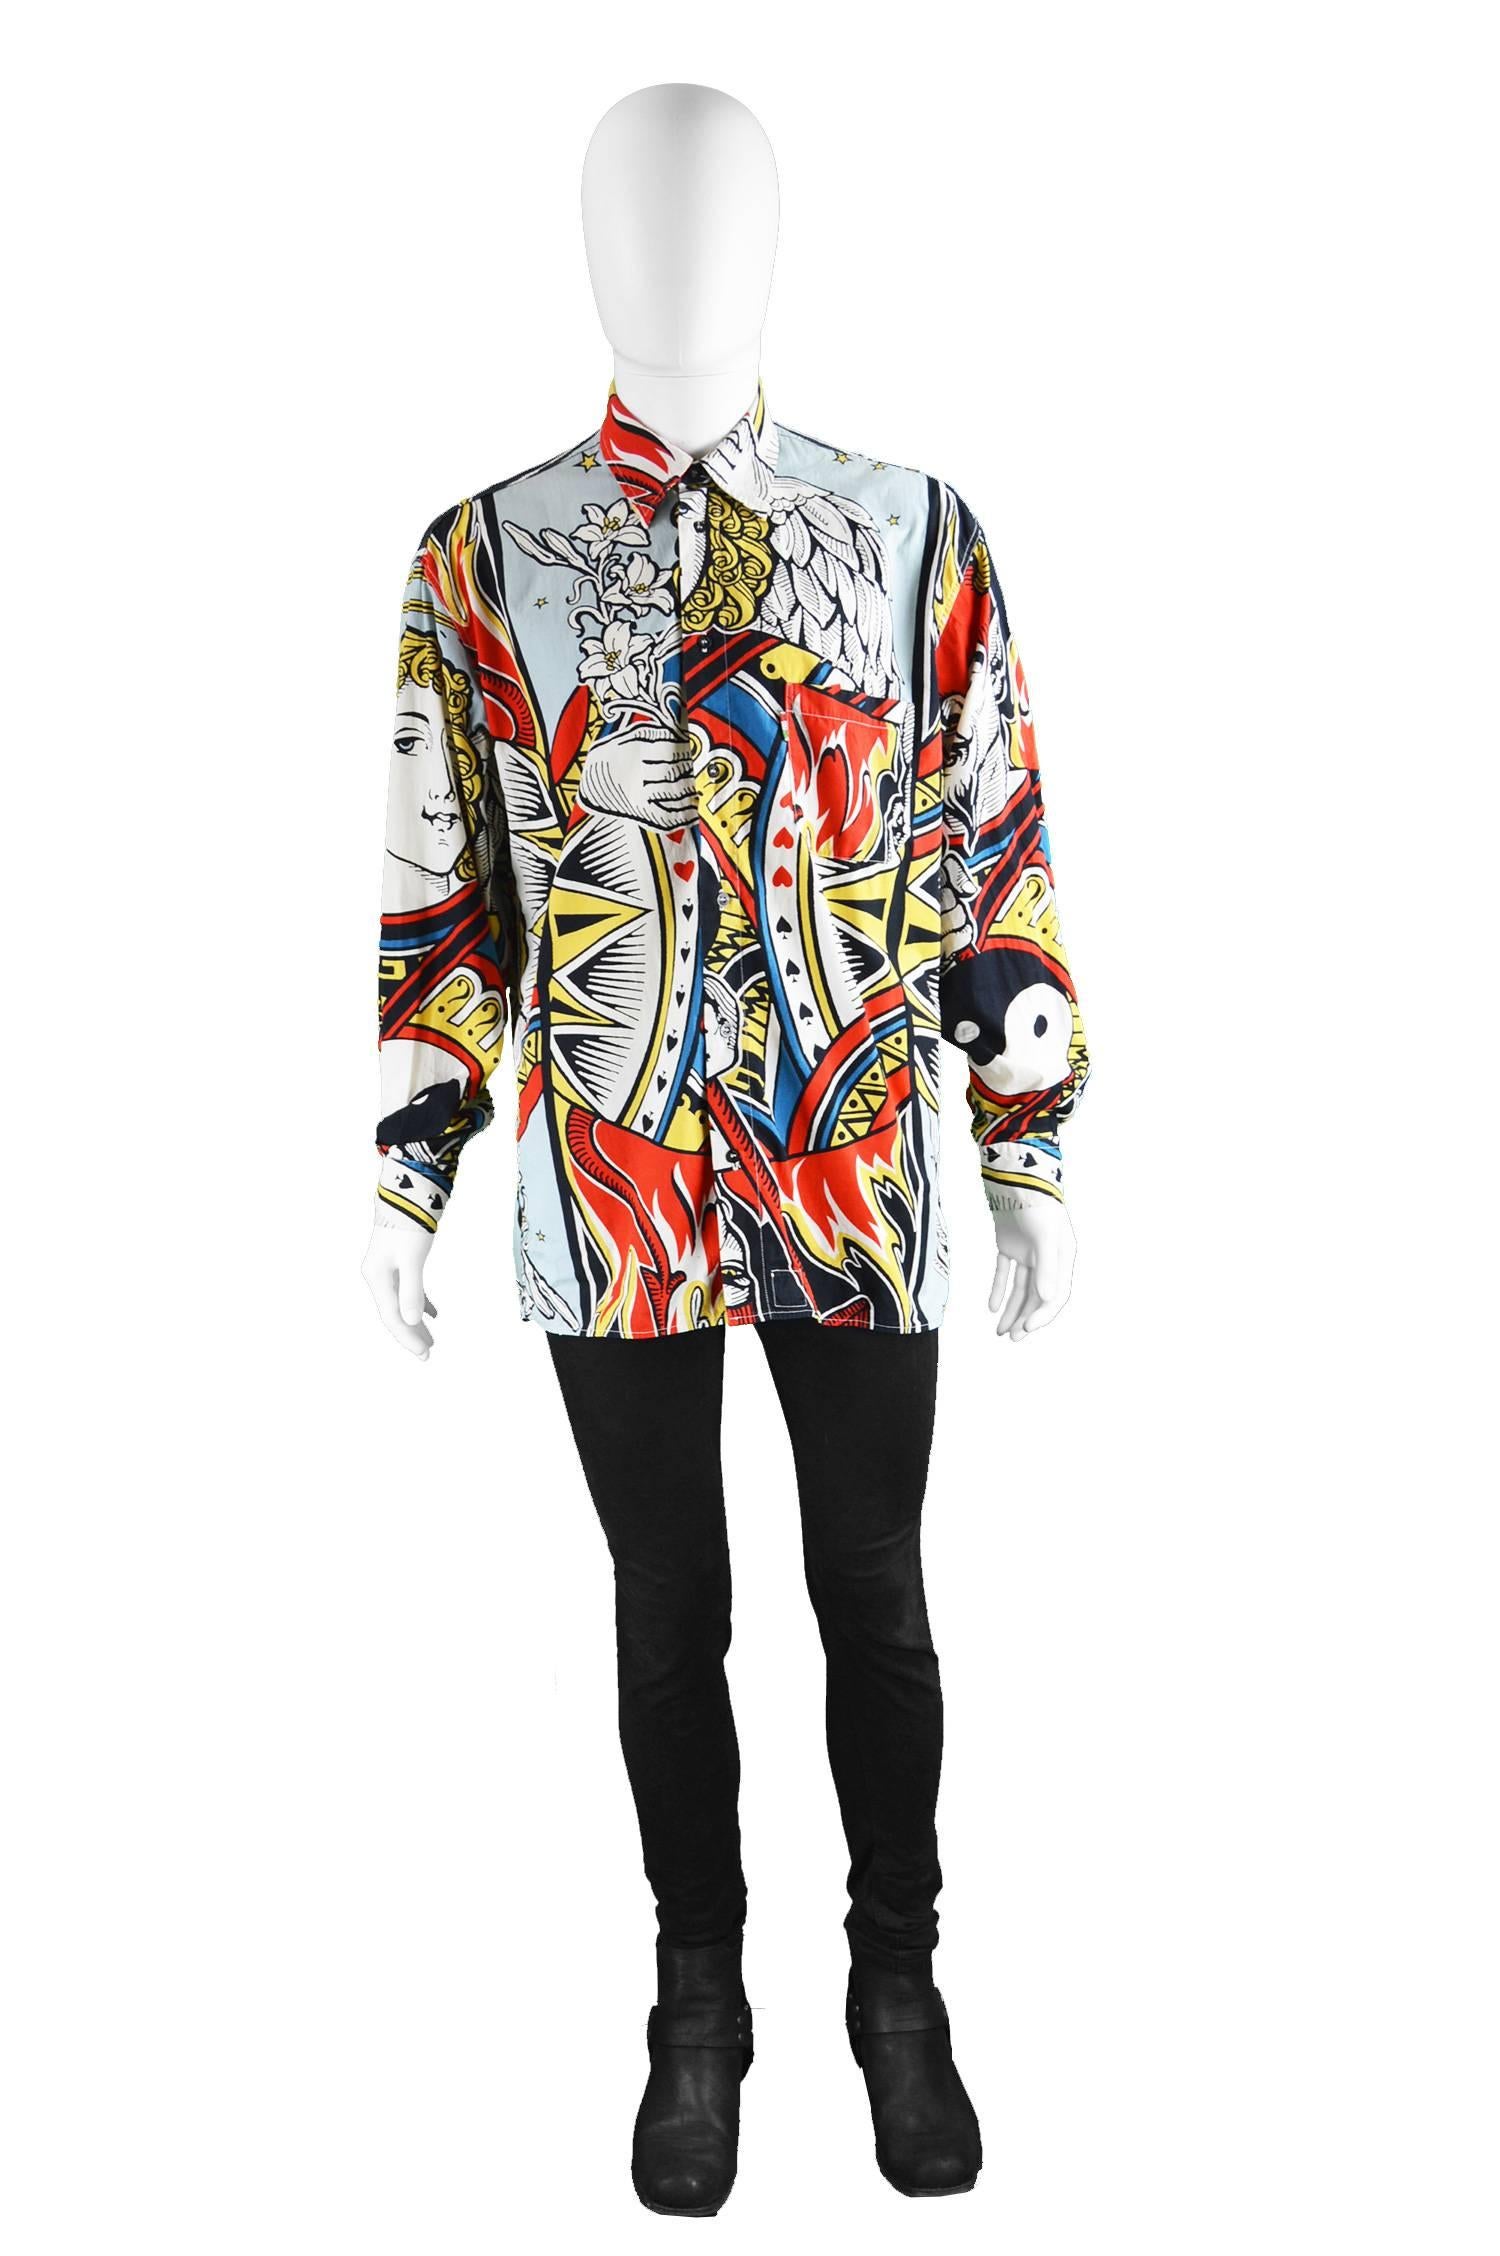 Moschino Devil, Angel & Yin Yang Men's Cotton Button Up Shirt, c. 1991

Size: Marked Medium but this gives a loose, oversized fit as pictured so would also suit men’s Large.
Chest - 48” / 122cm
Length (Shoulder to Hem) - 29” / 73cm
Shoulder to